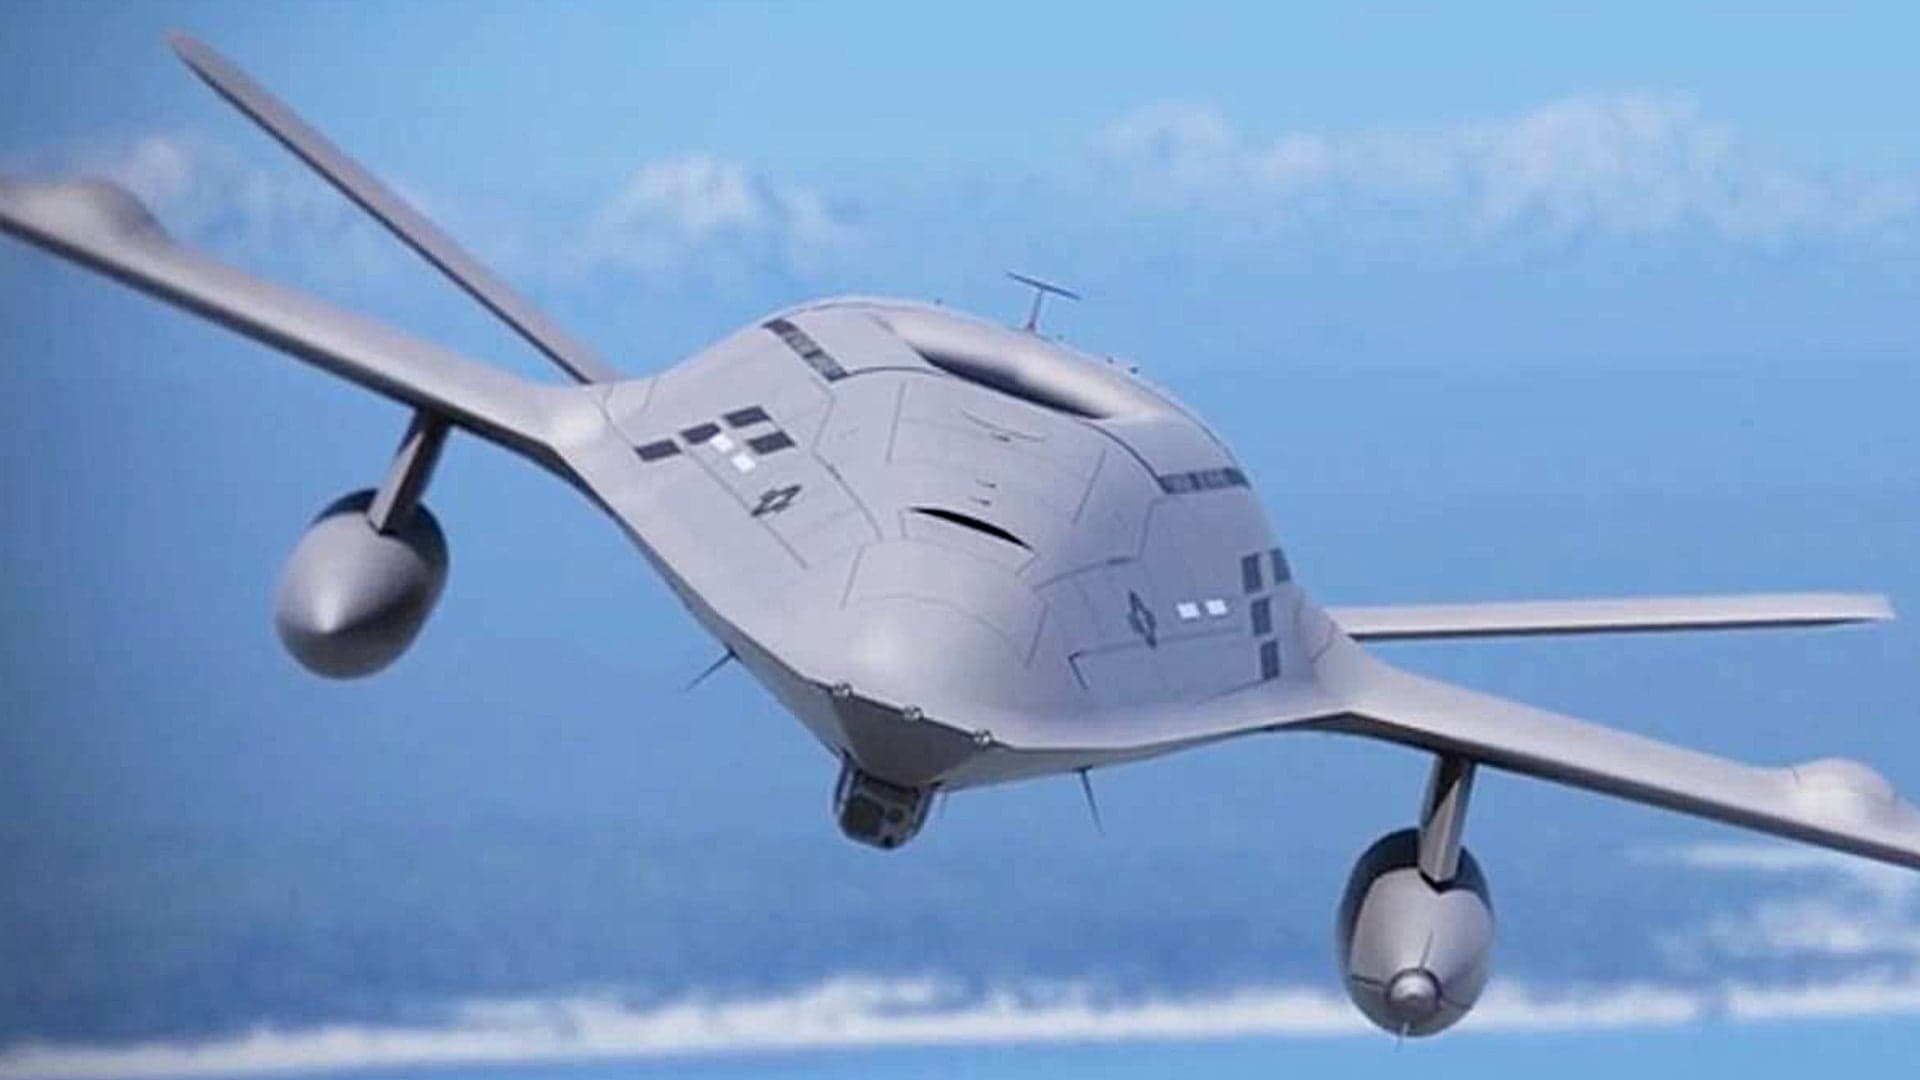 Boeing Is The Winner Of The Navy’s MQ-25 Stingray Tanker Drone Competition (Updated)